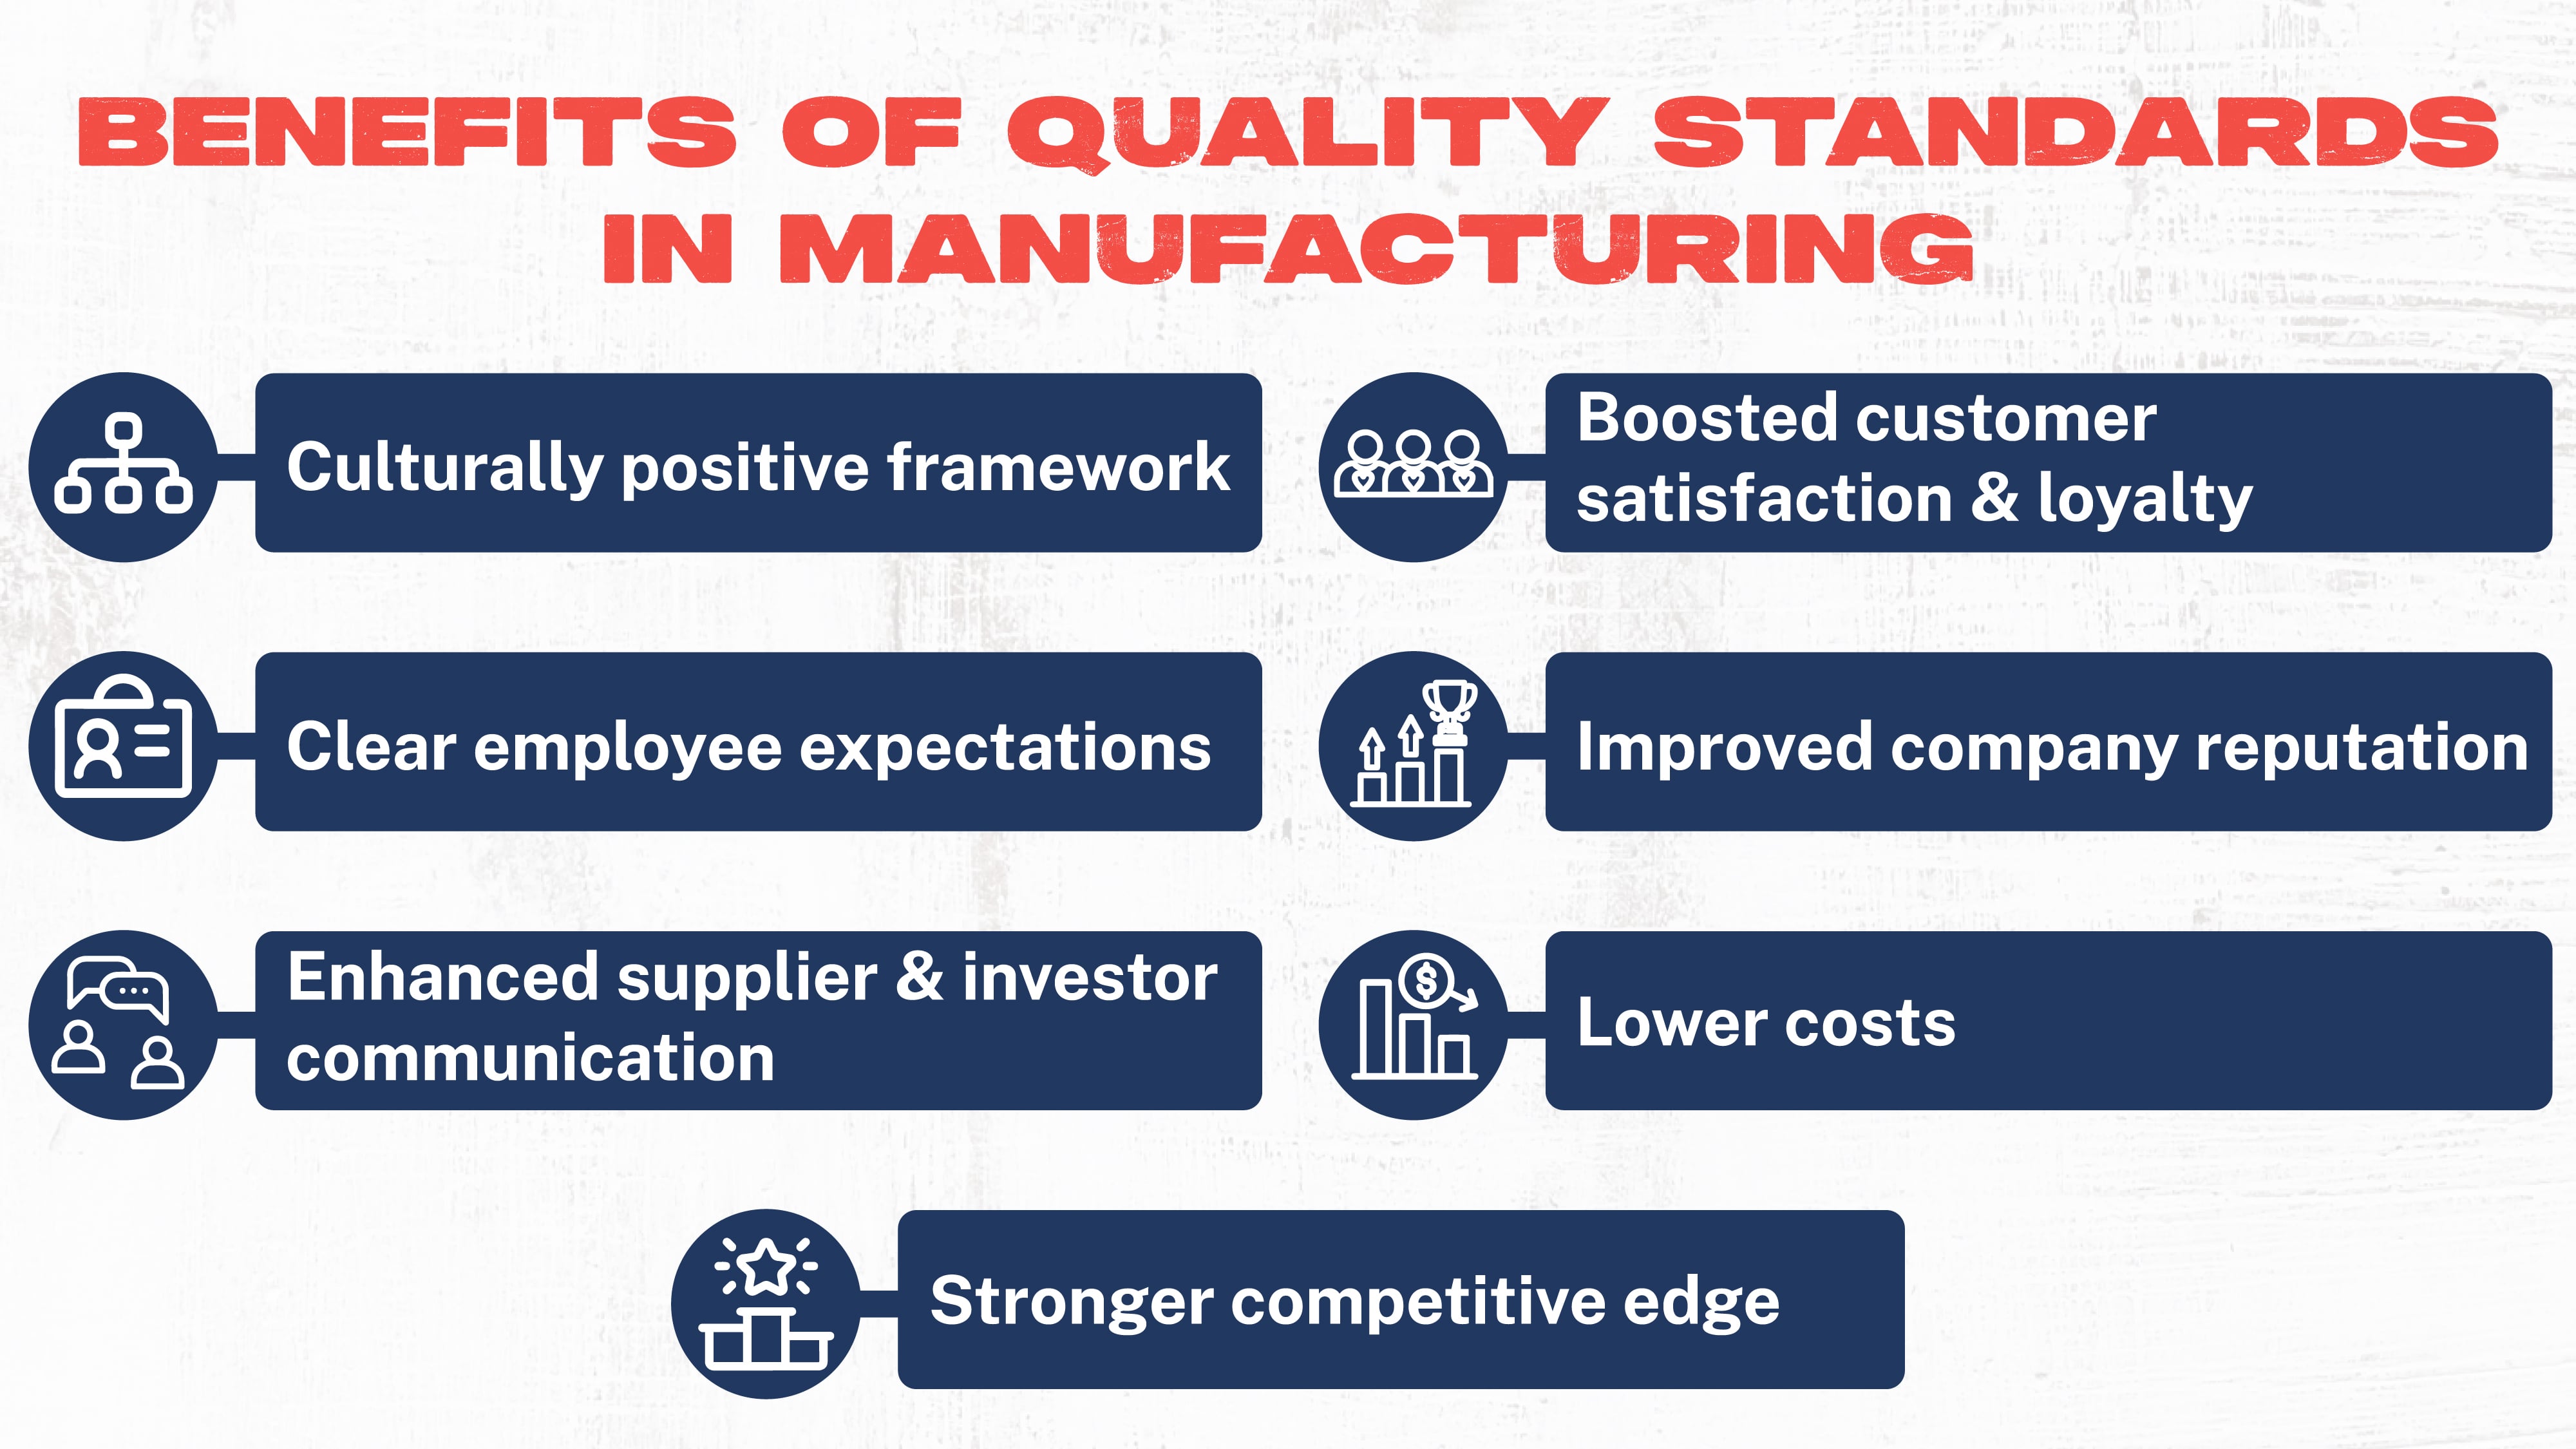 Benefits of Quality Standards in Manufacturing